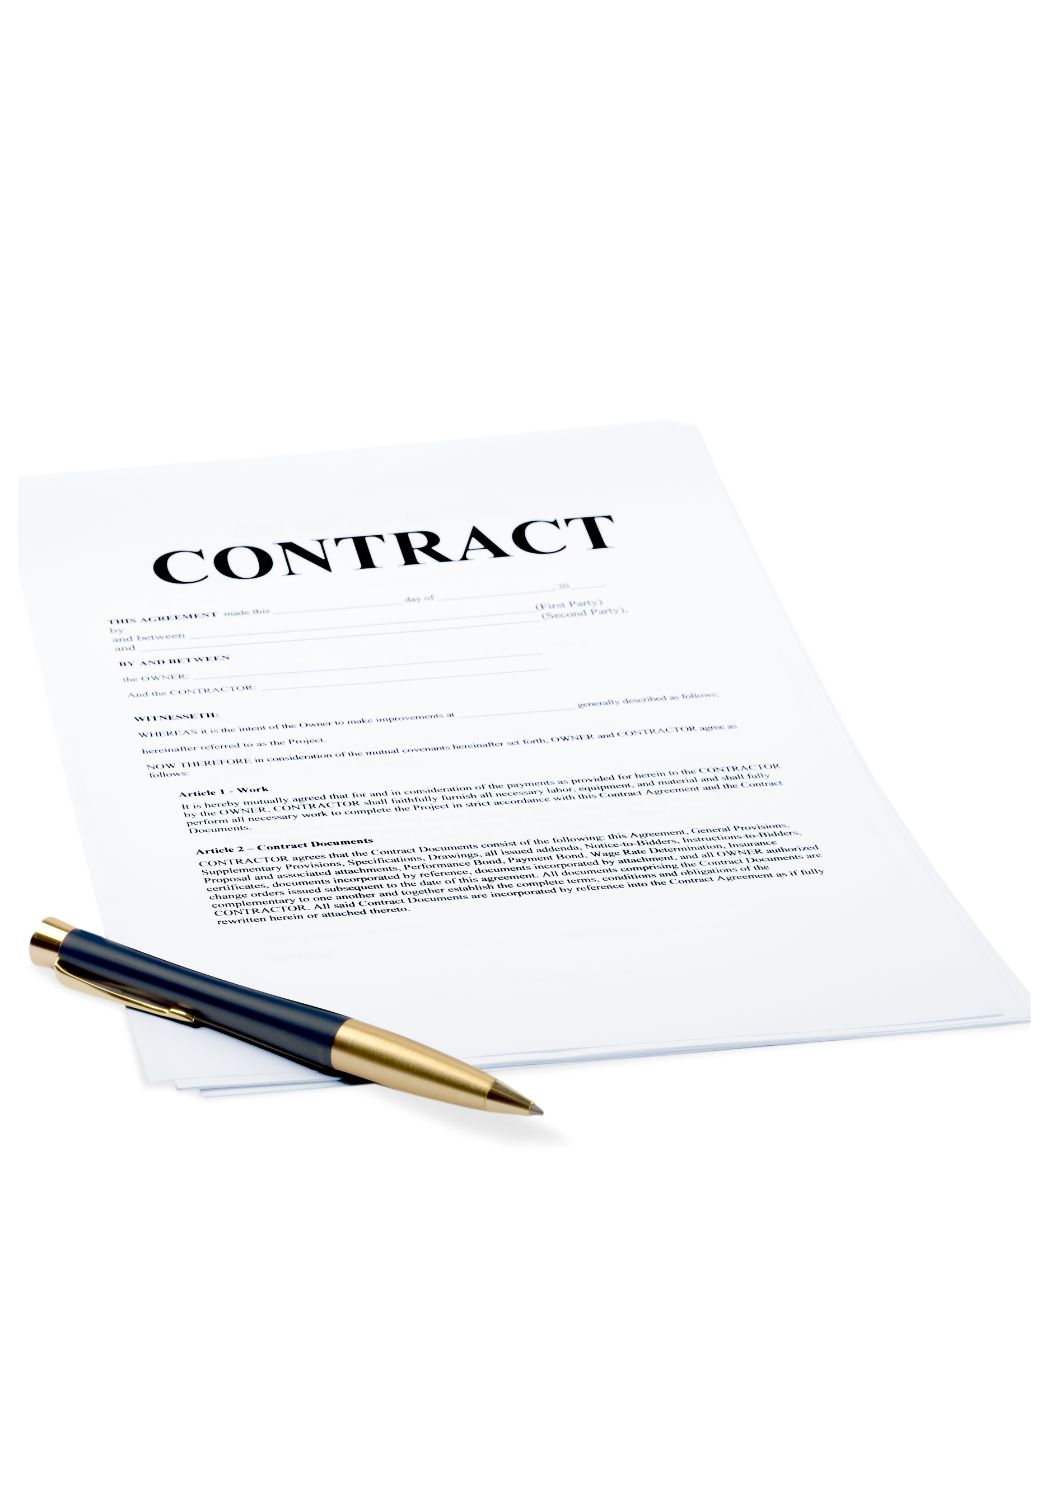 IP Contracts and Agreements